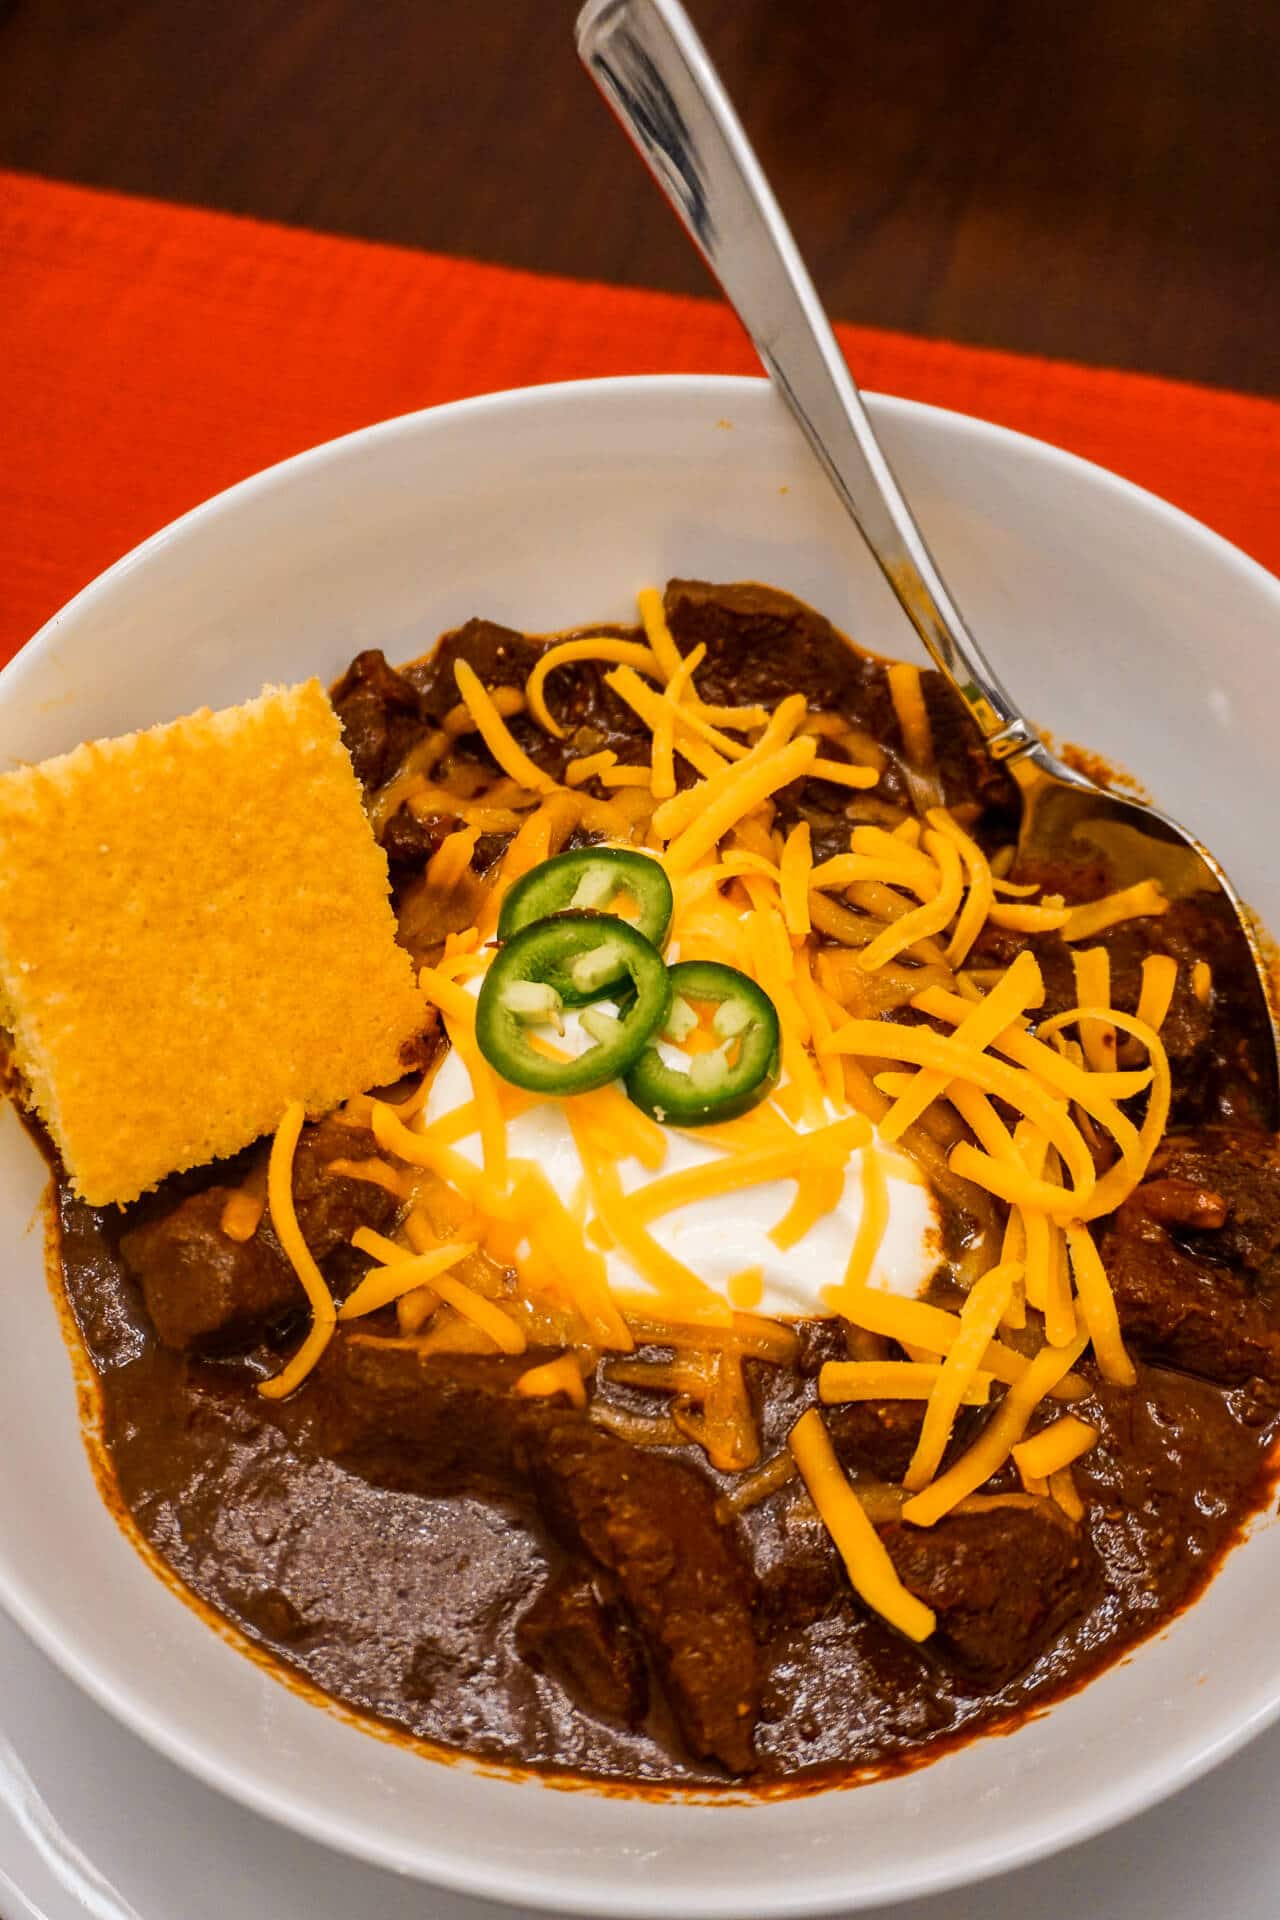 The Best Texas Chili - Authentic Recipe from a Born and Raised Texan